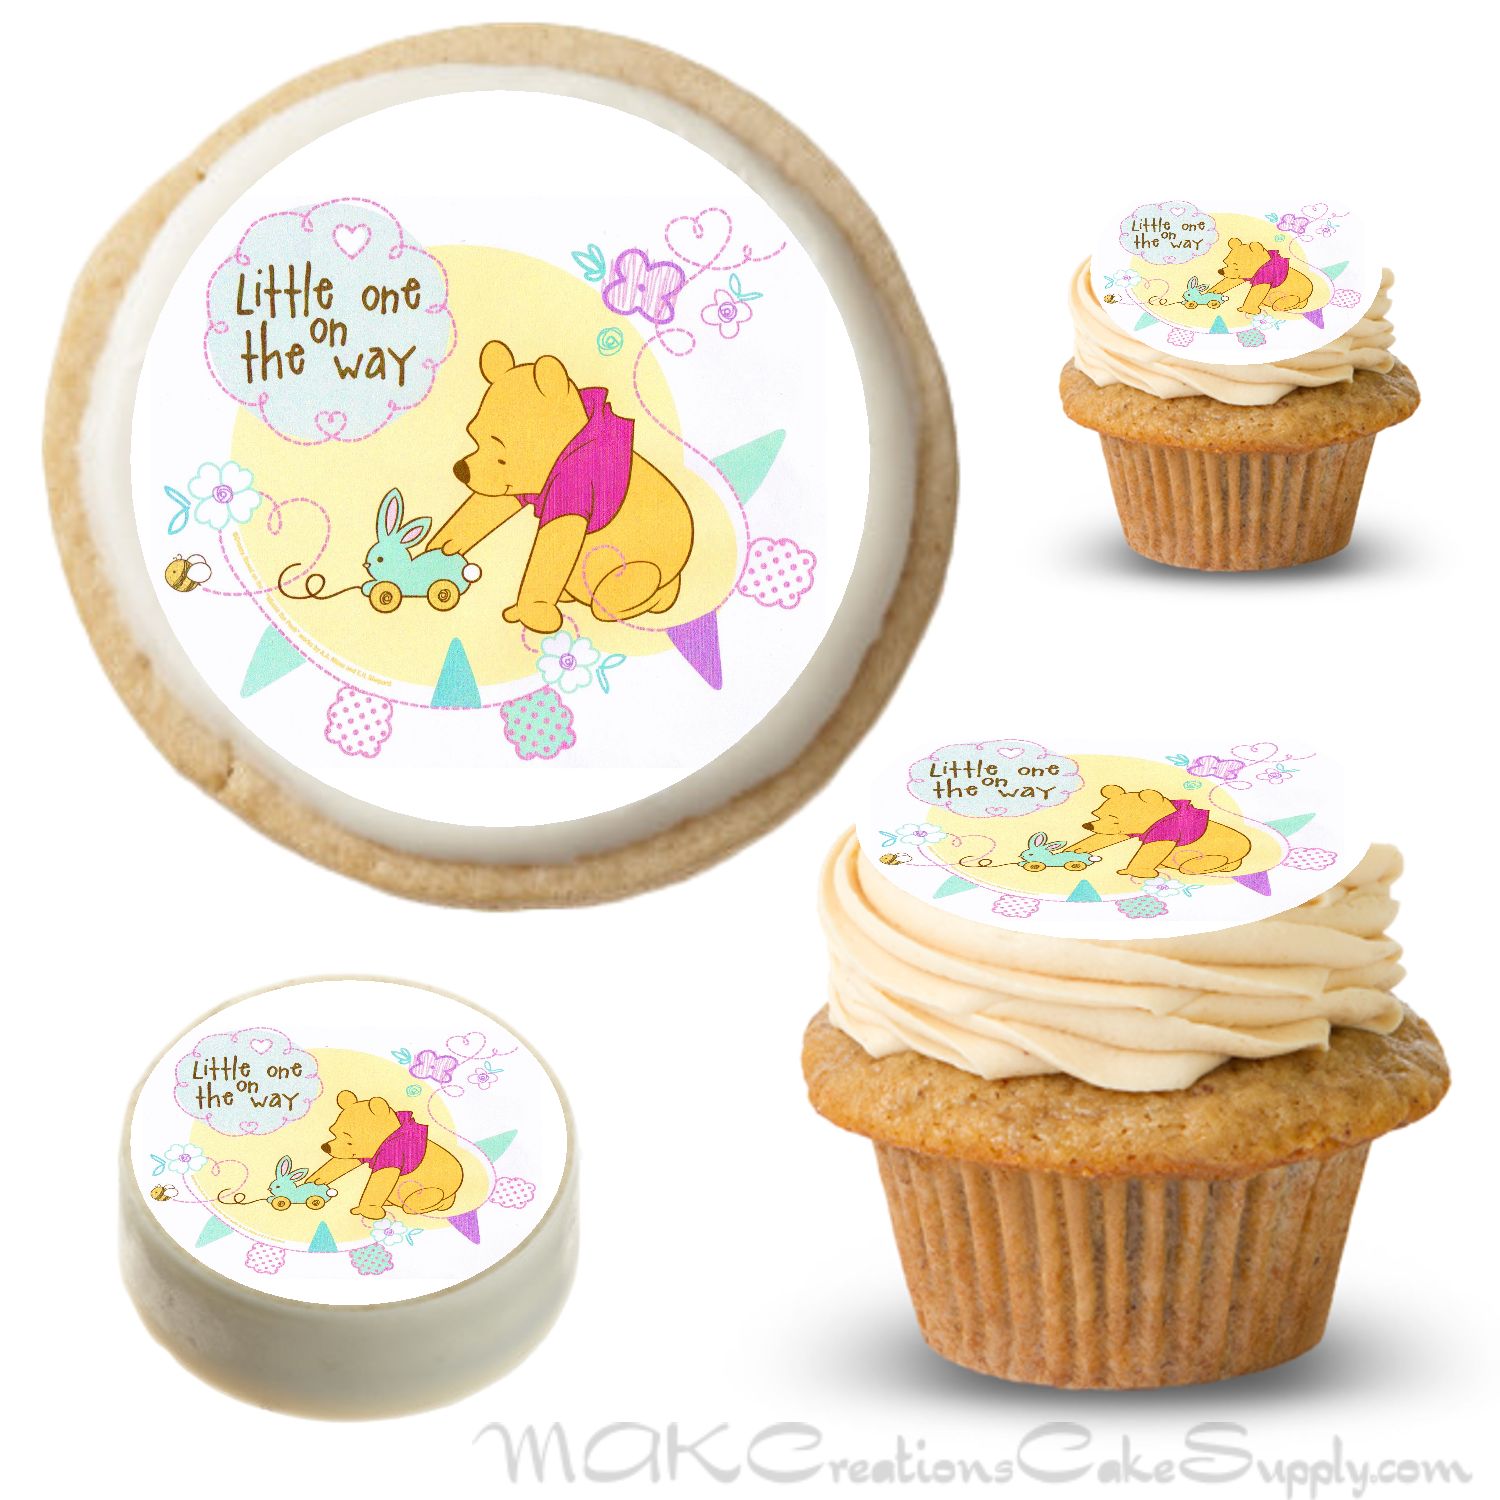  30 x Edible Cupcake Toppers Themed of Winnie the Pooh